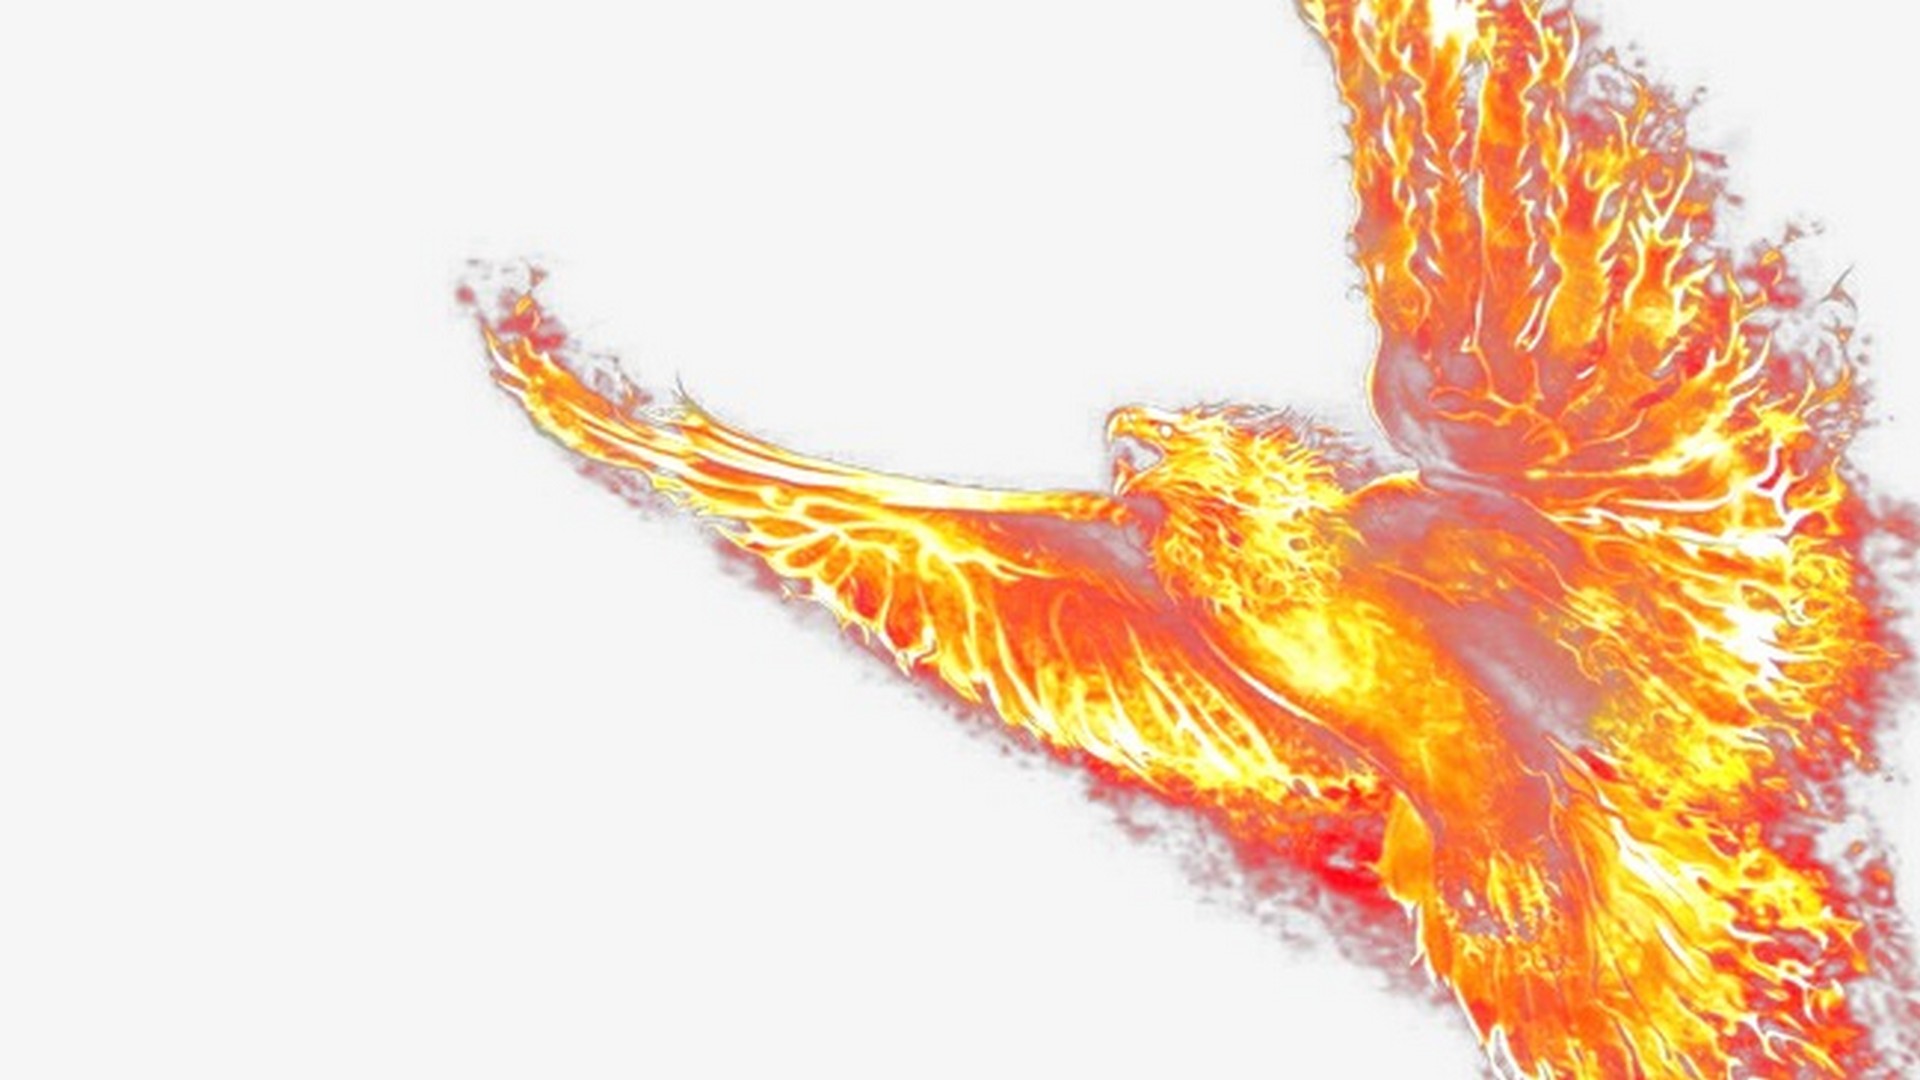 Phoenix Images Wallpaper For Desktop with image resolution 1920x1080 pixel. You can use this wallpaper as background for your desktop Computer Screensavers, Android or iPhone smartphones